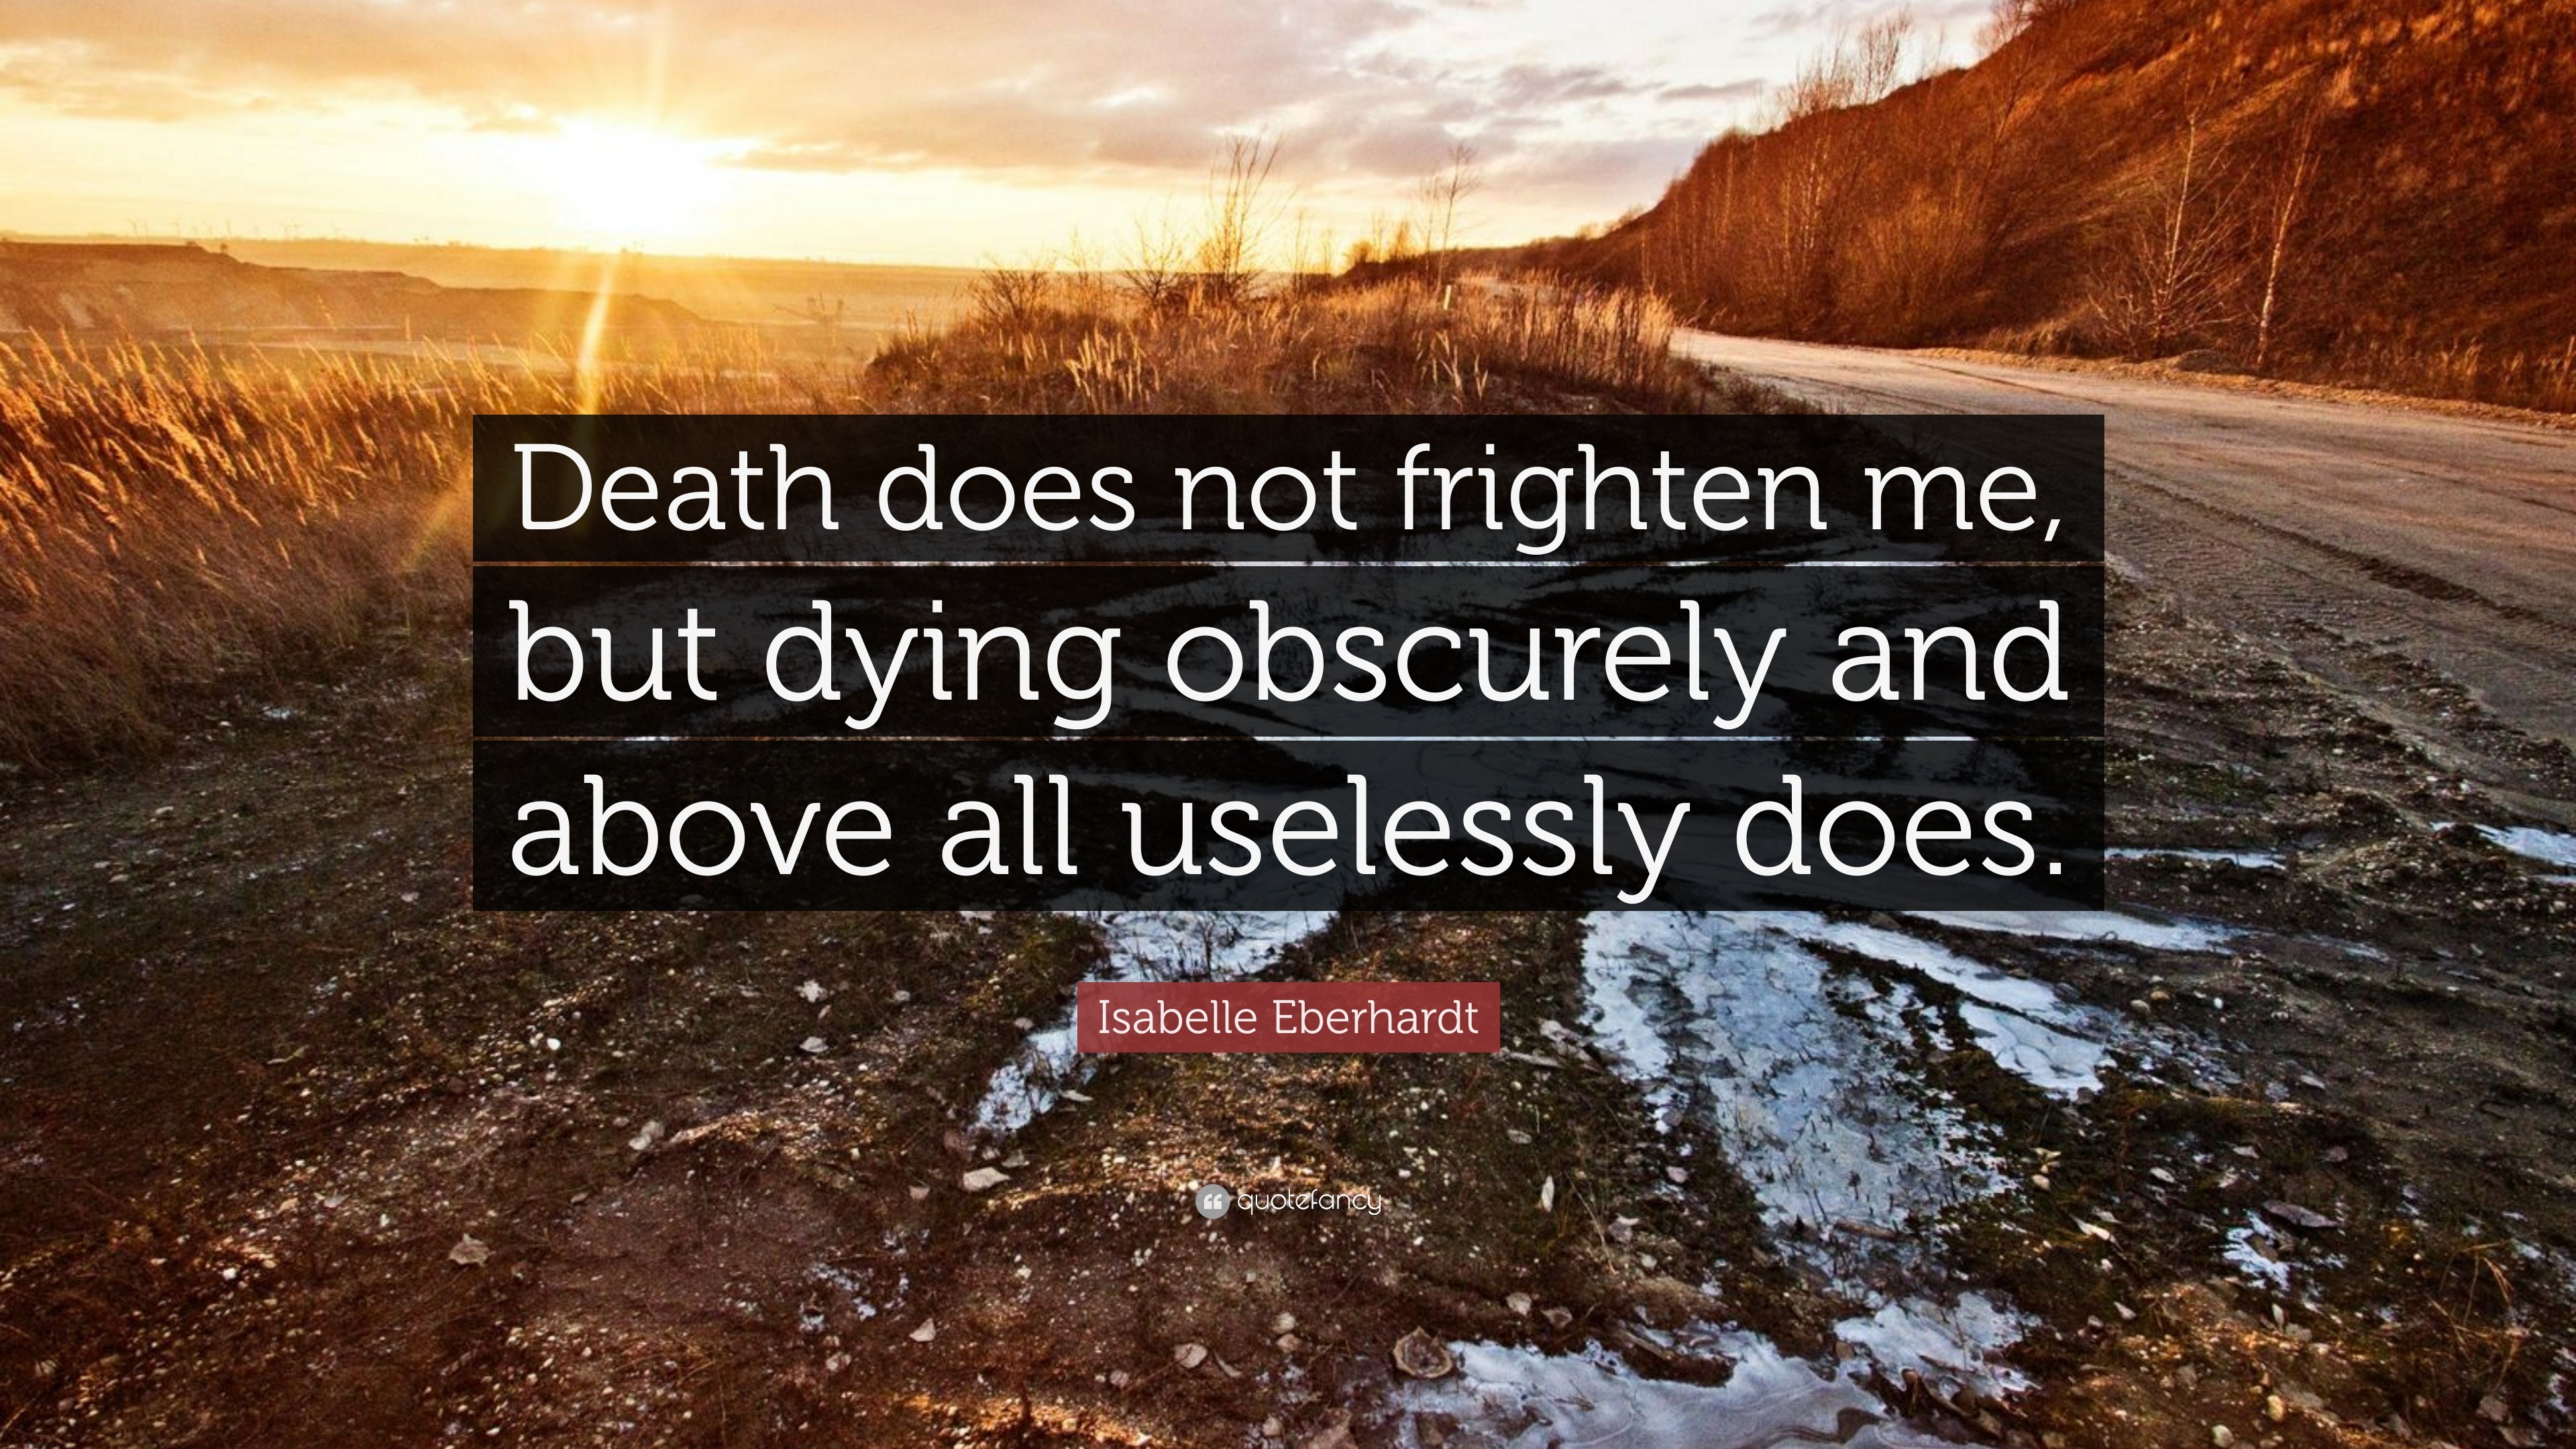 Isabelle Eberhardt Quote: “Death does not frighten me, but dying